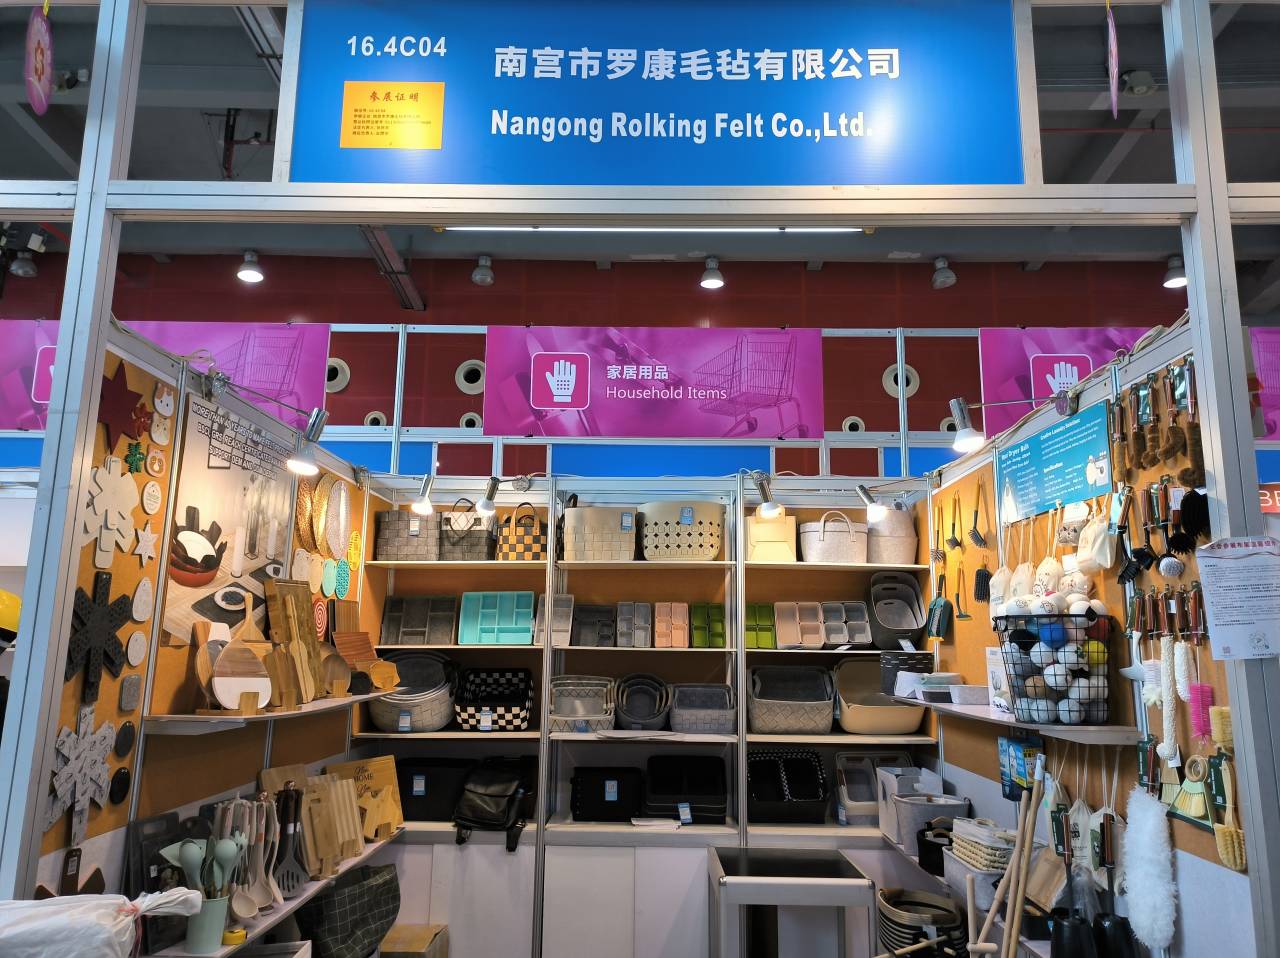 The 133rd China Import and Export Fair, or Canton Fair